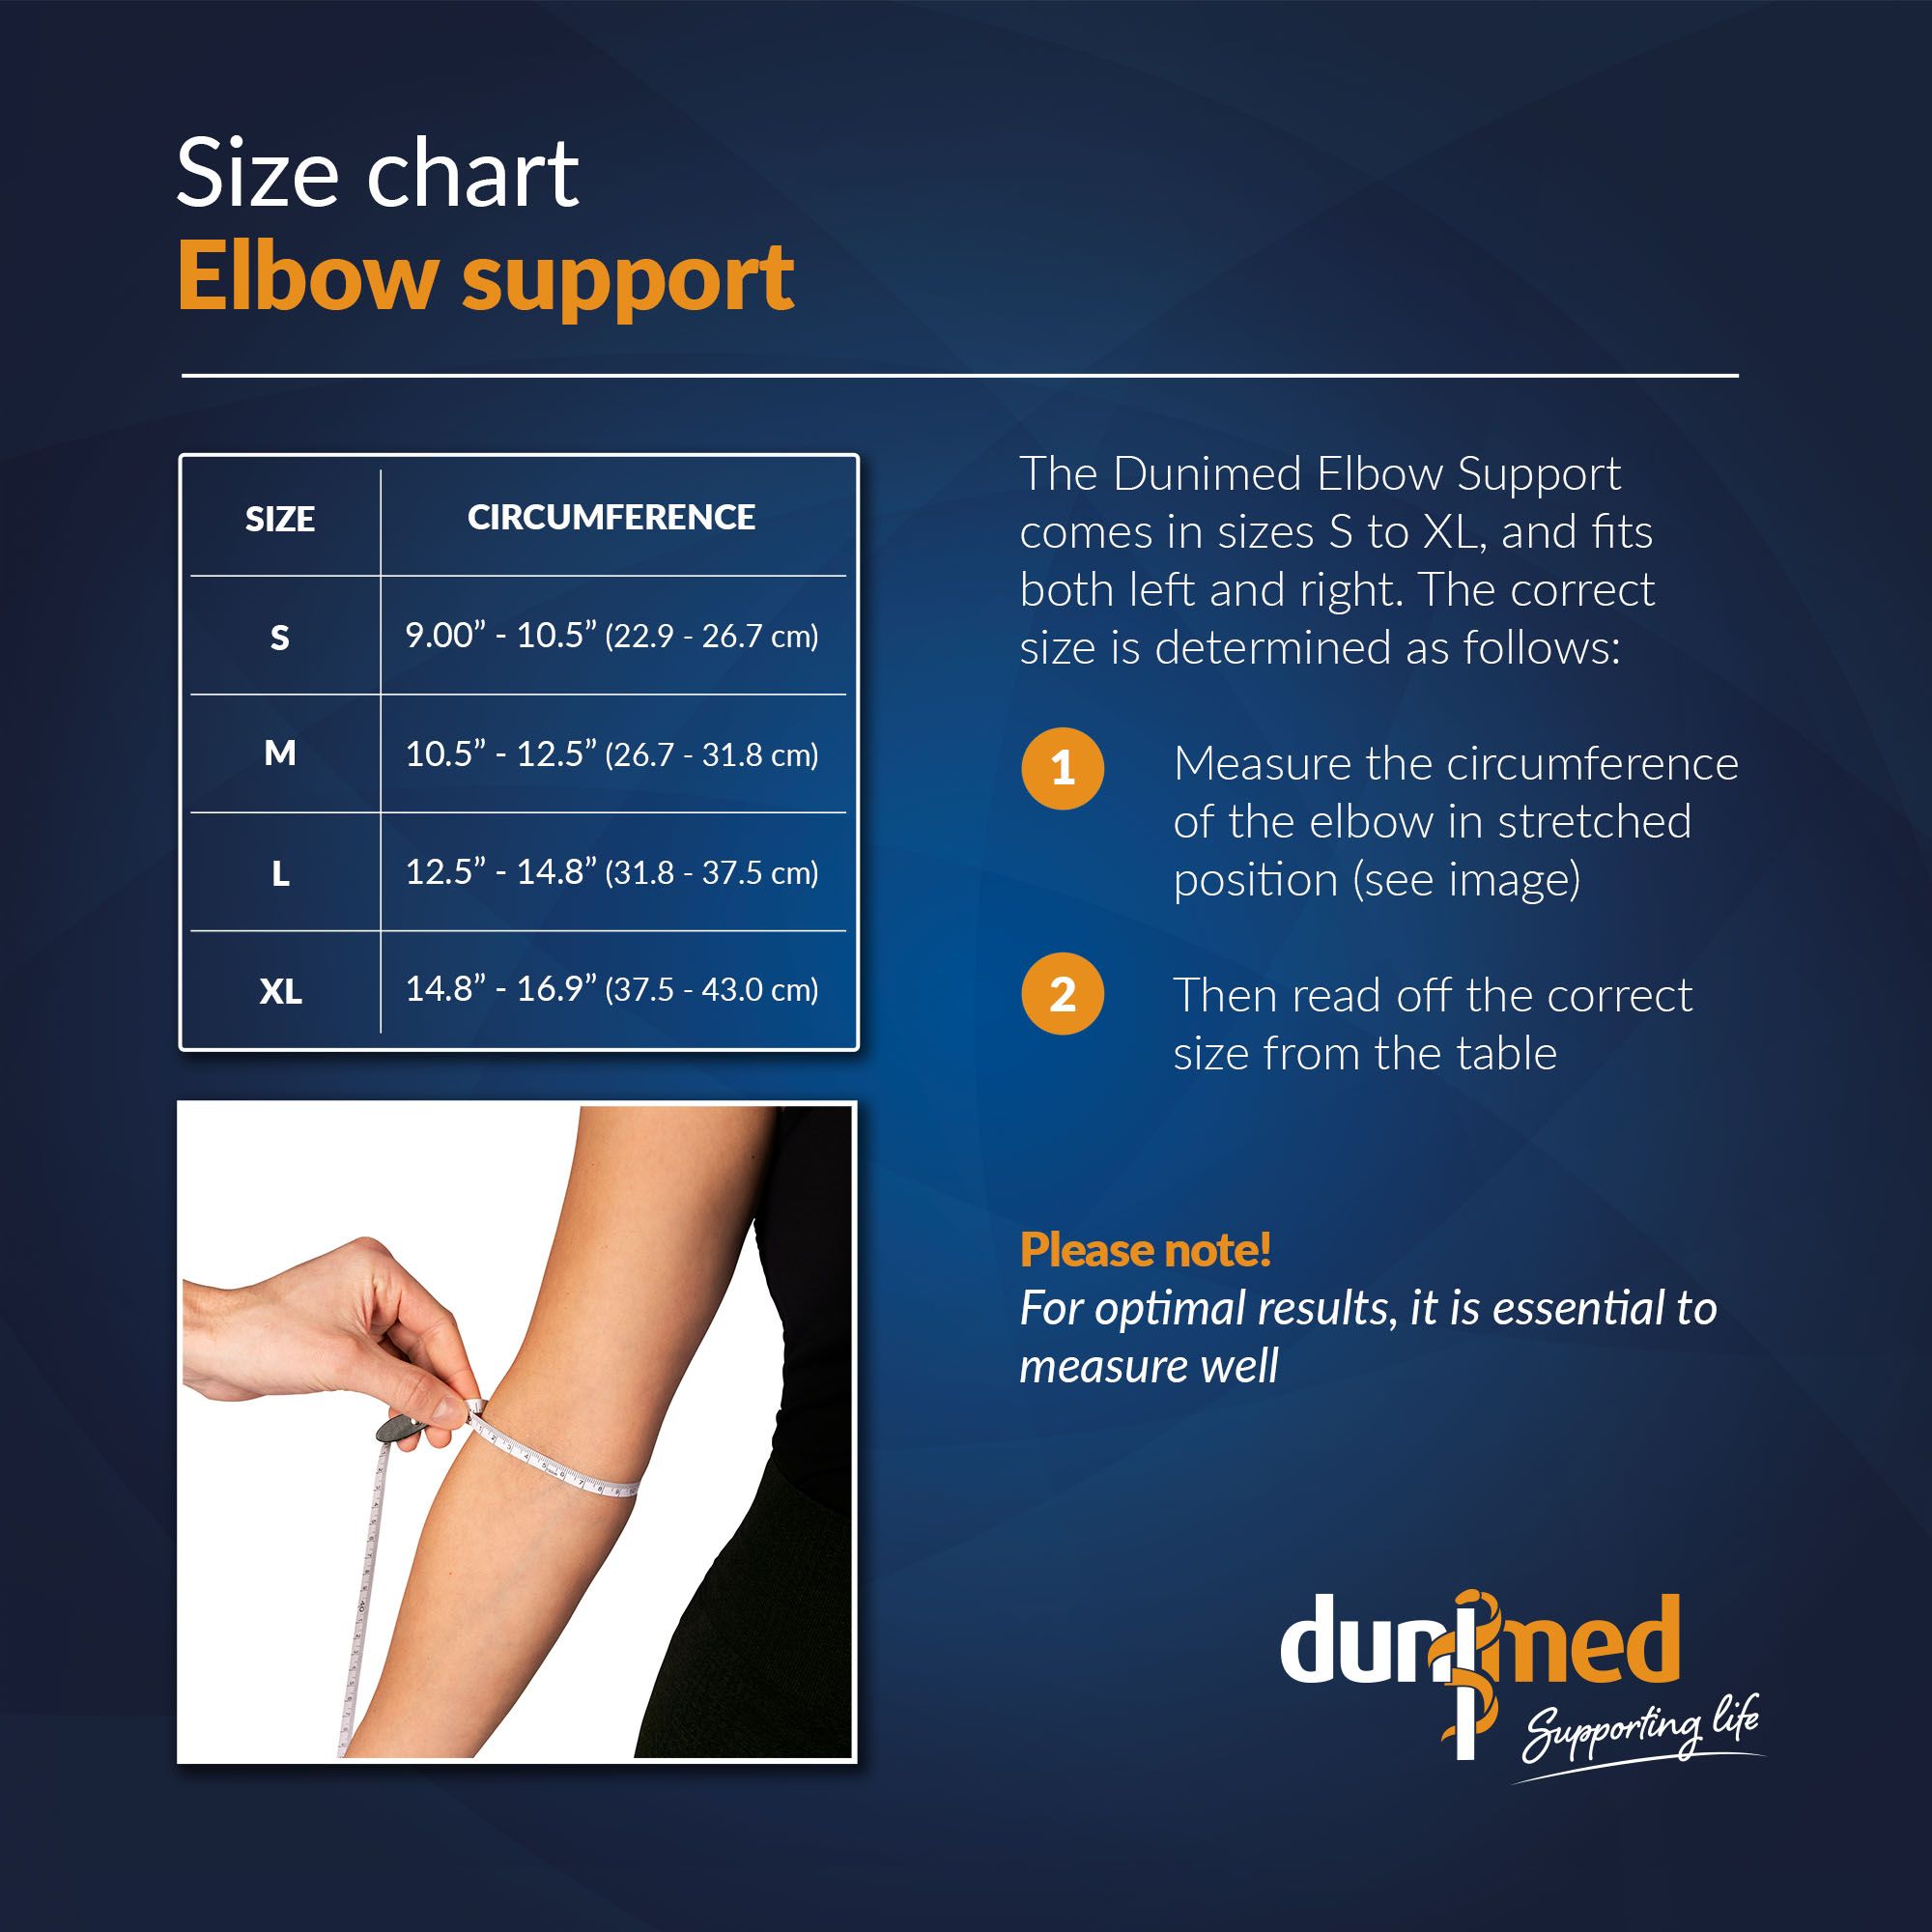 Size chart Dunimed Elbow Support